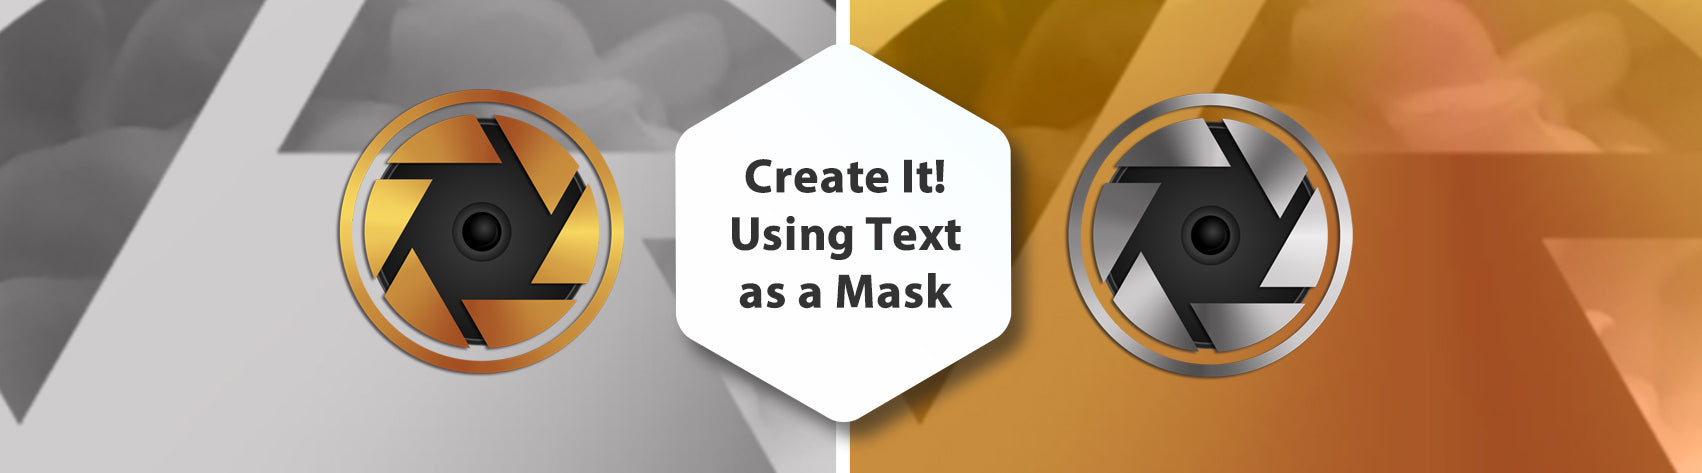 Create It! - Using Text as a Mask